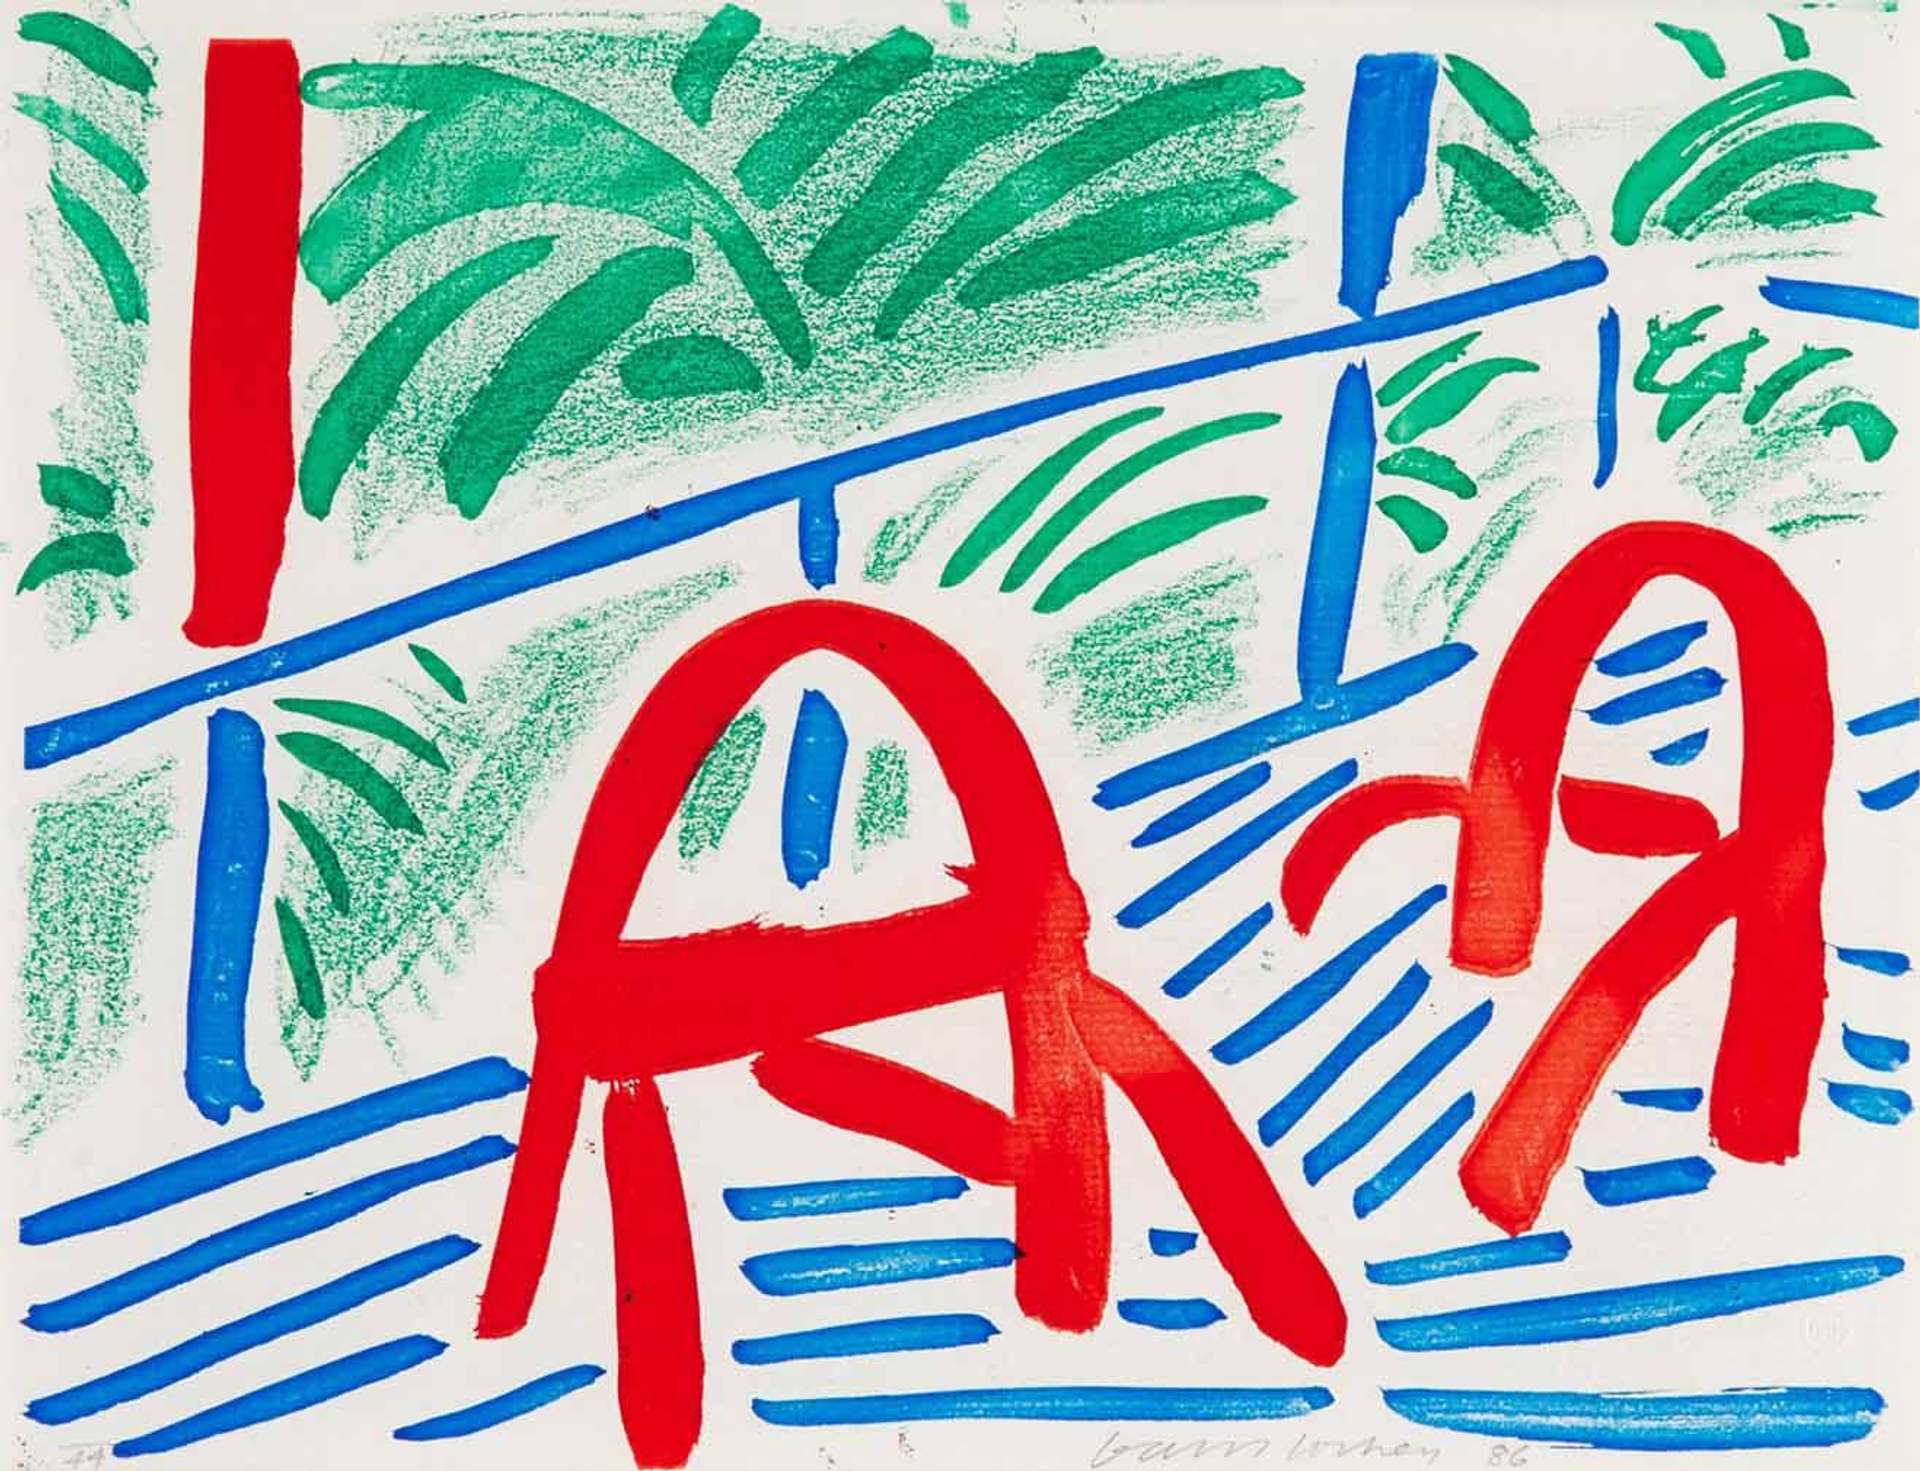 A photocopyprint by David Hockney depicting two red chairs in an outdoor scene.